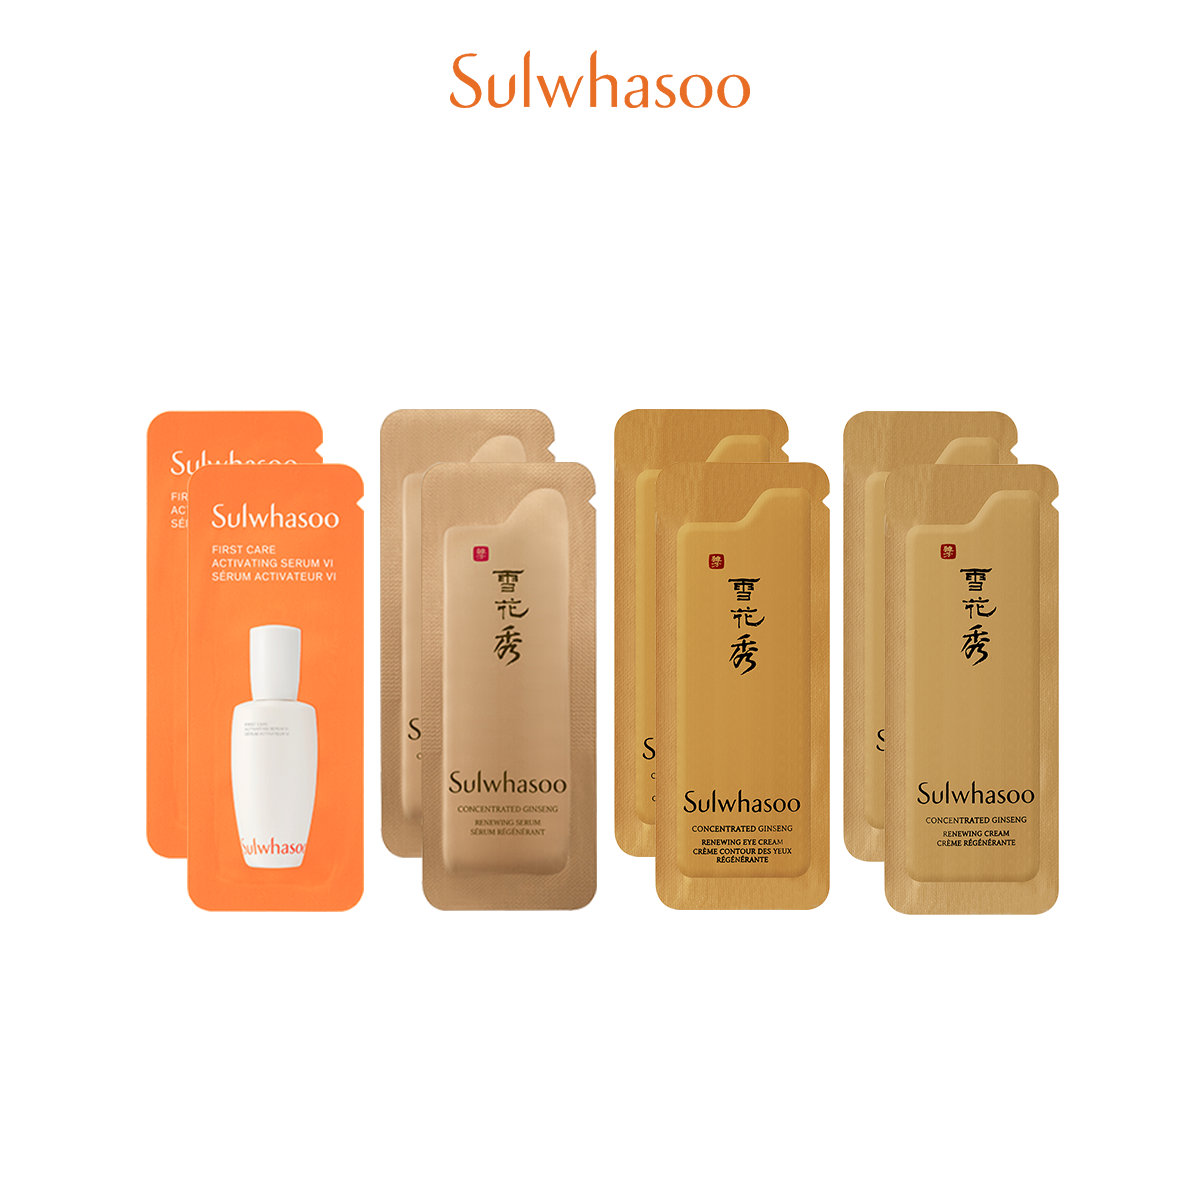 Sulwhasoo Concentrated Ginseng Renewing Trial kit